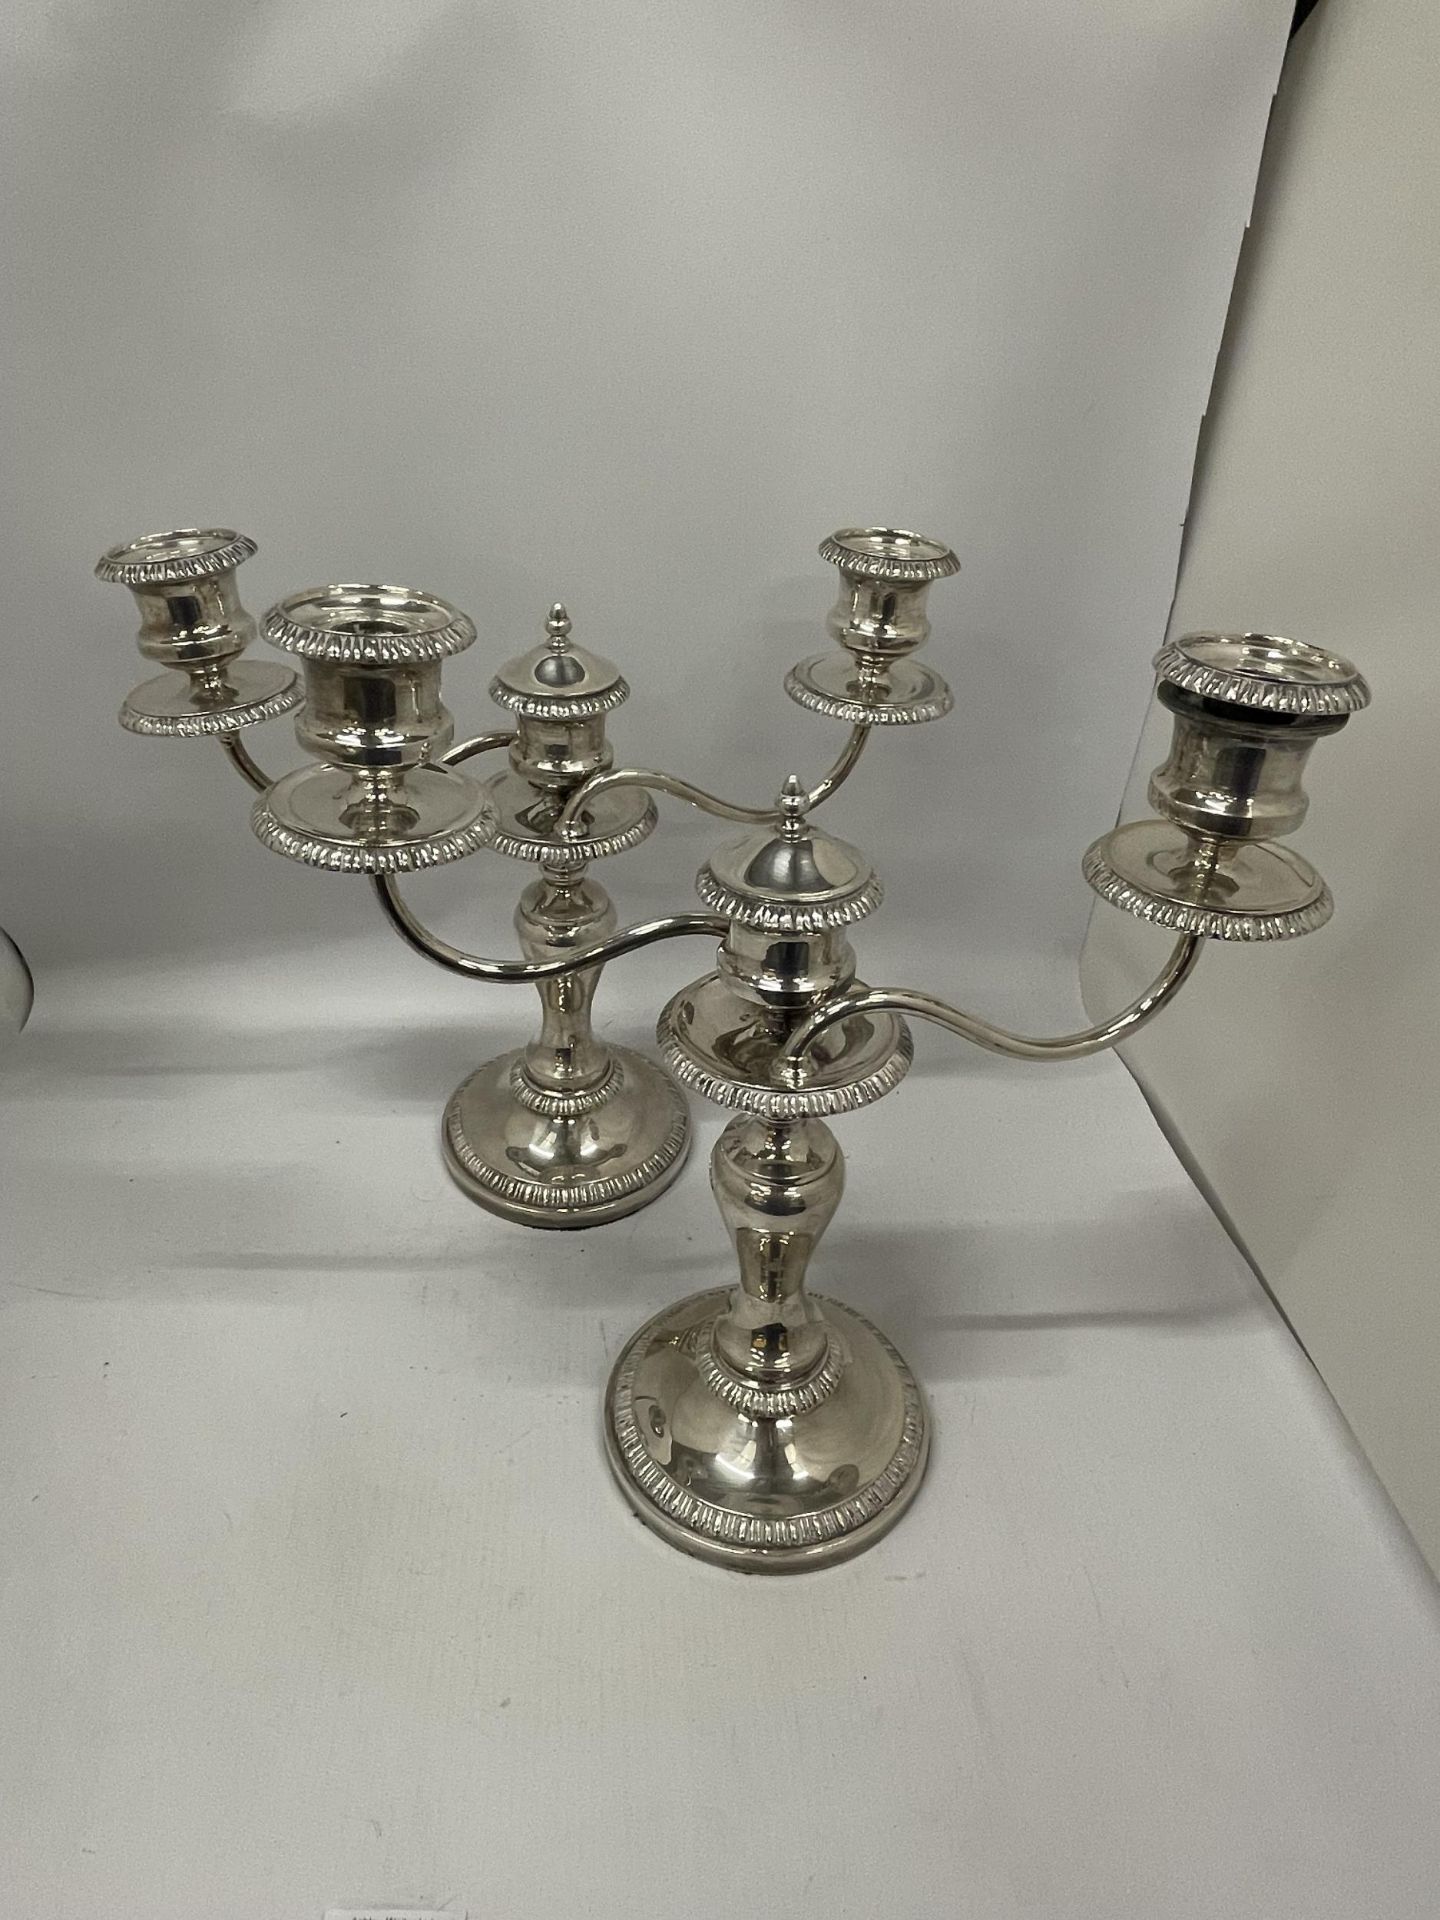 A PAIR OF GOOD QUALITY SILVER PLATED TWIN BRANCH CANDLE HOLDERS